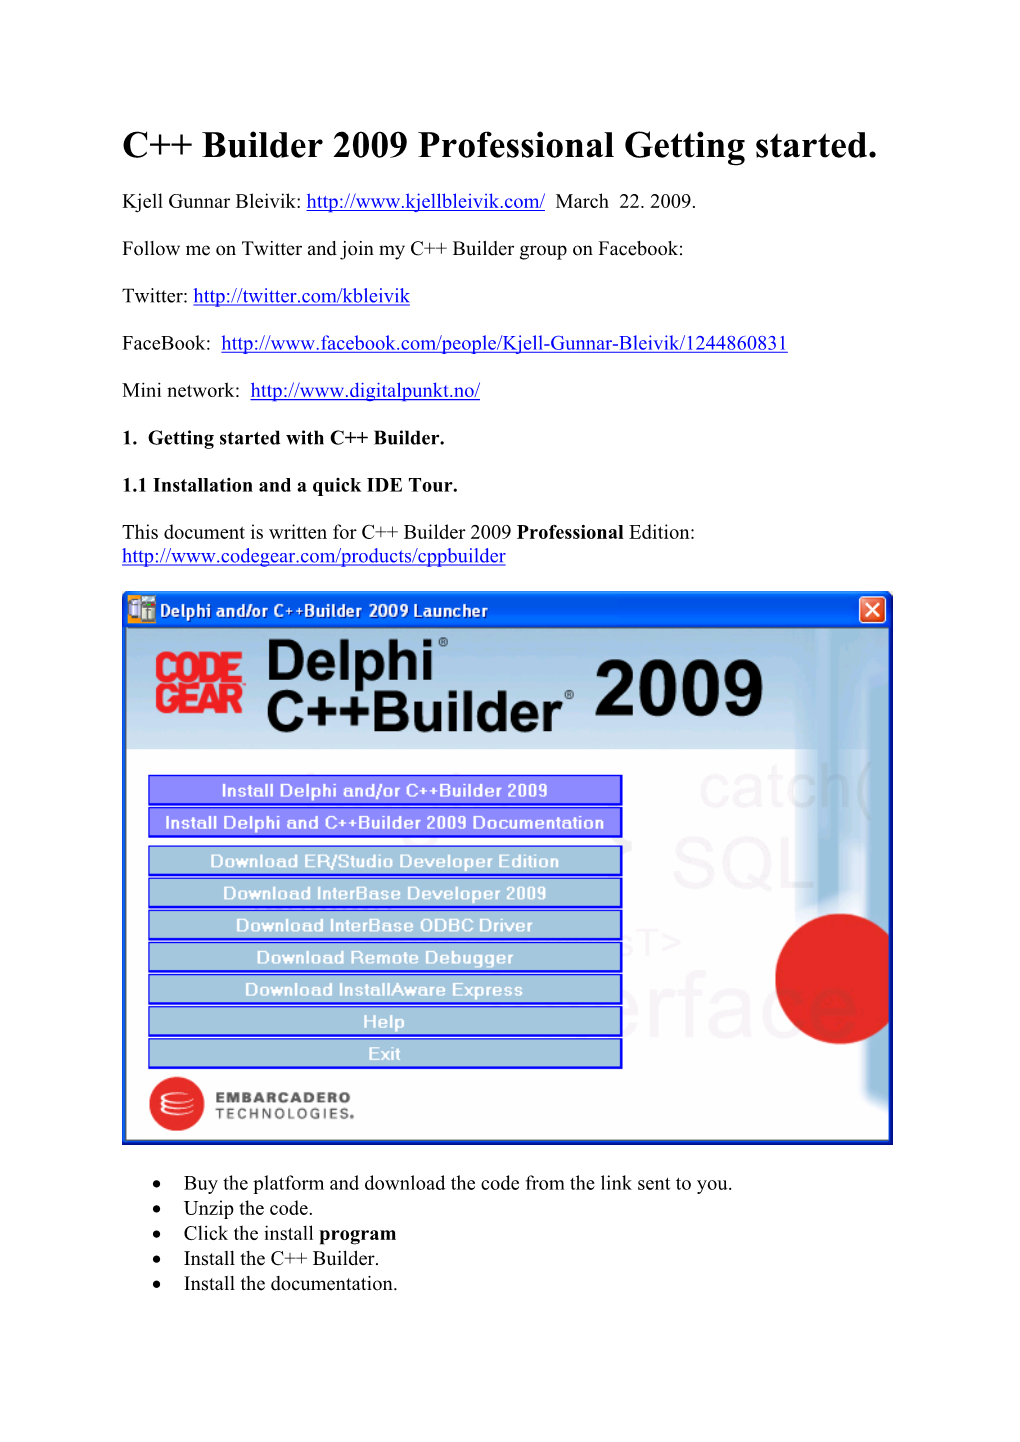 C++ Builder 2009 Professional Getting Started